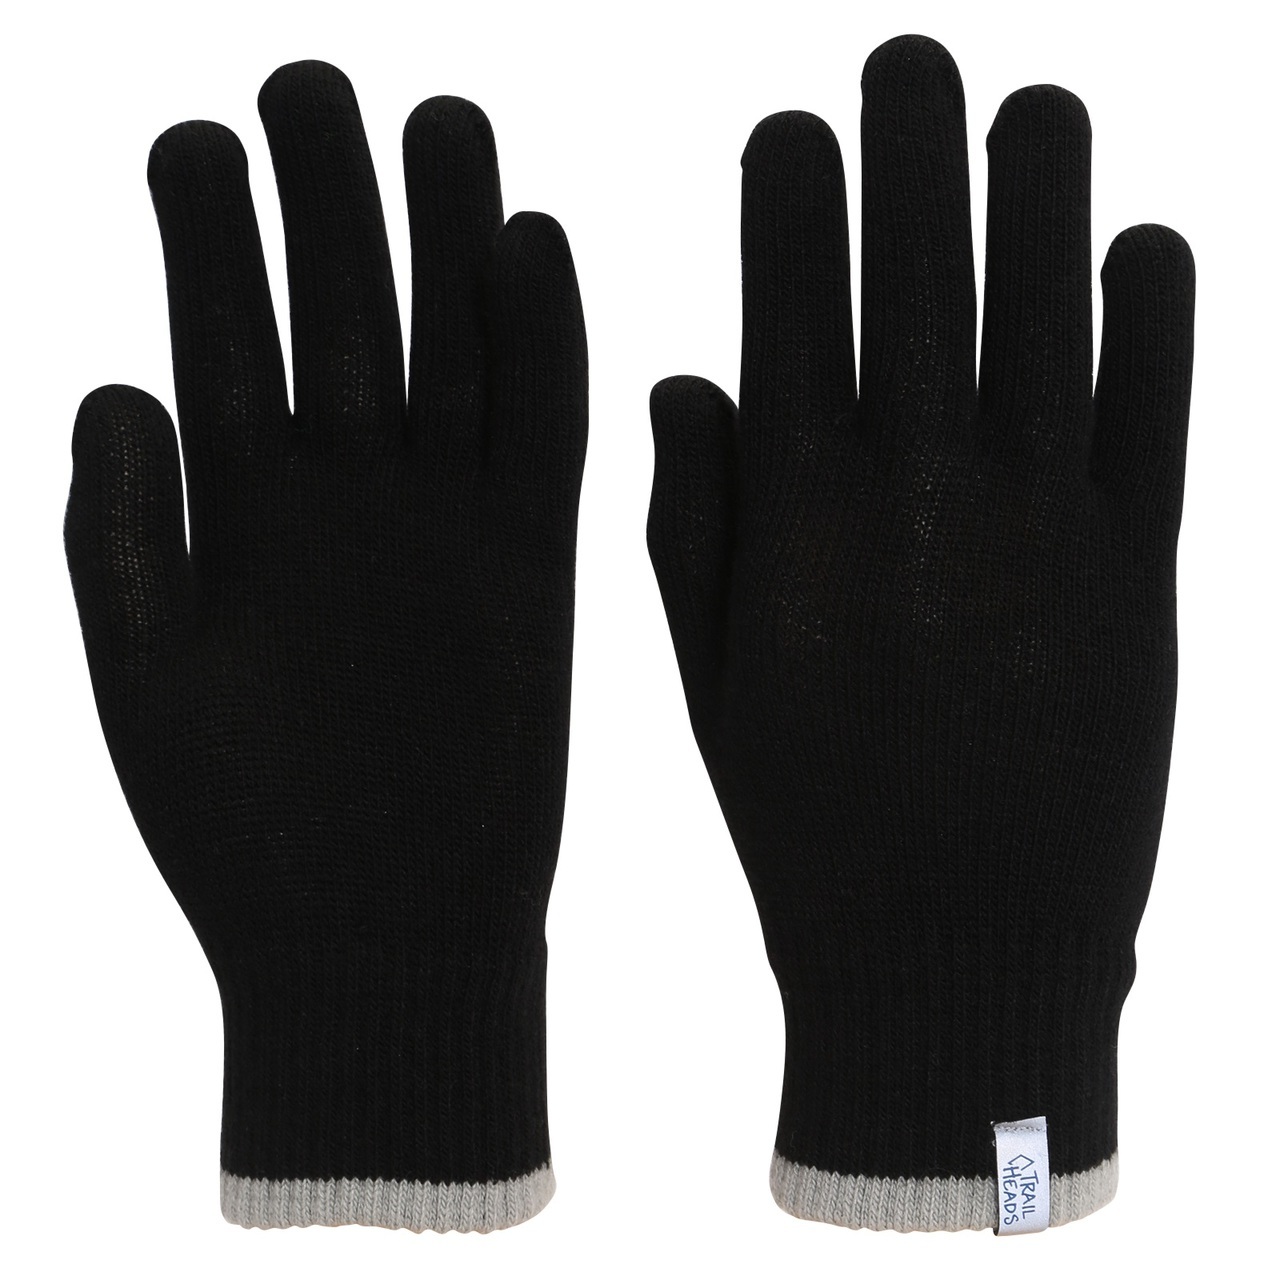 Black Glove Liners for Cold Weather Running